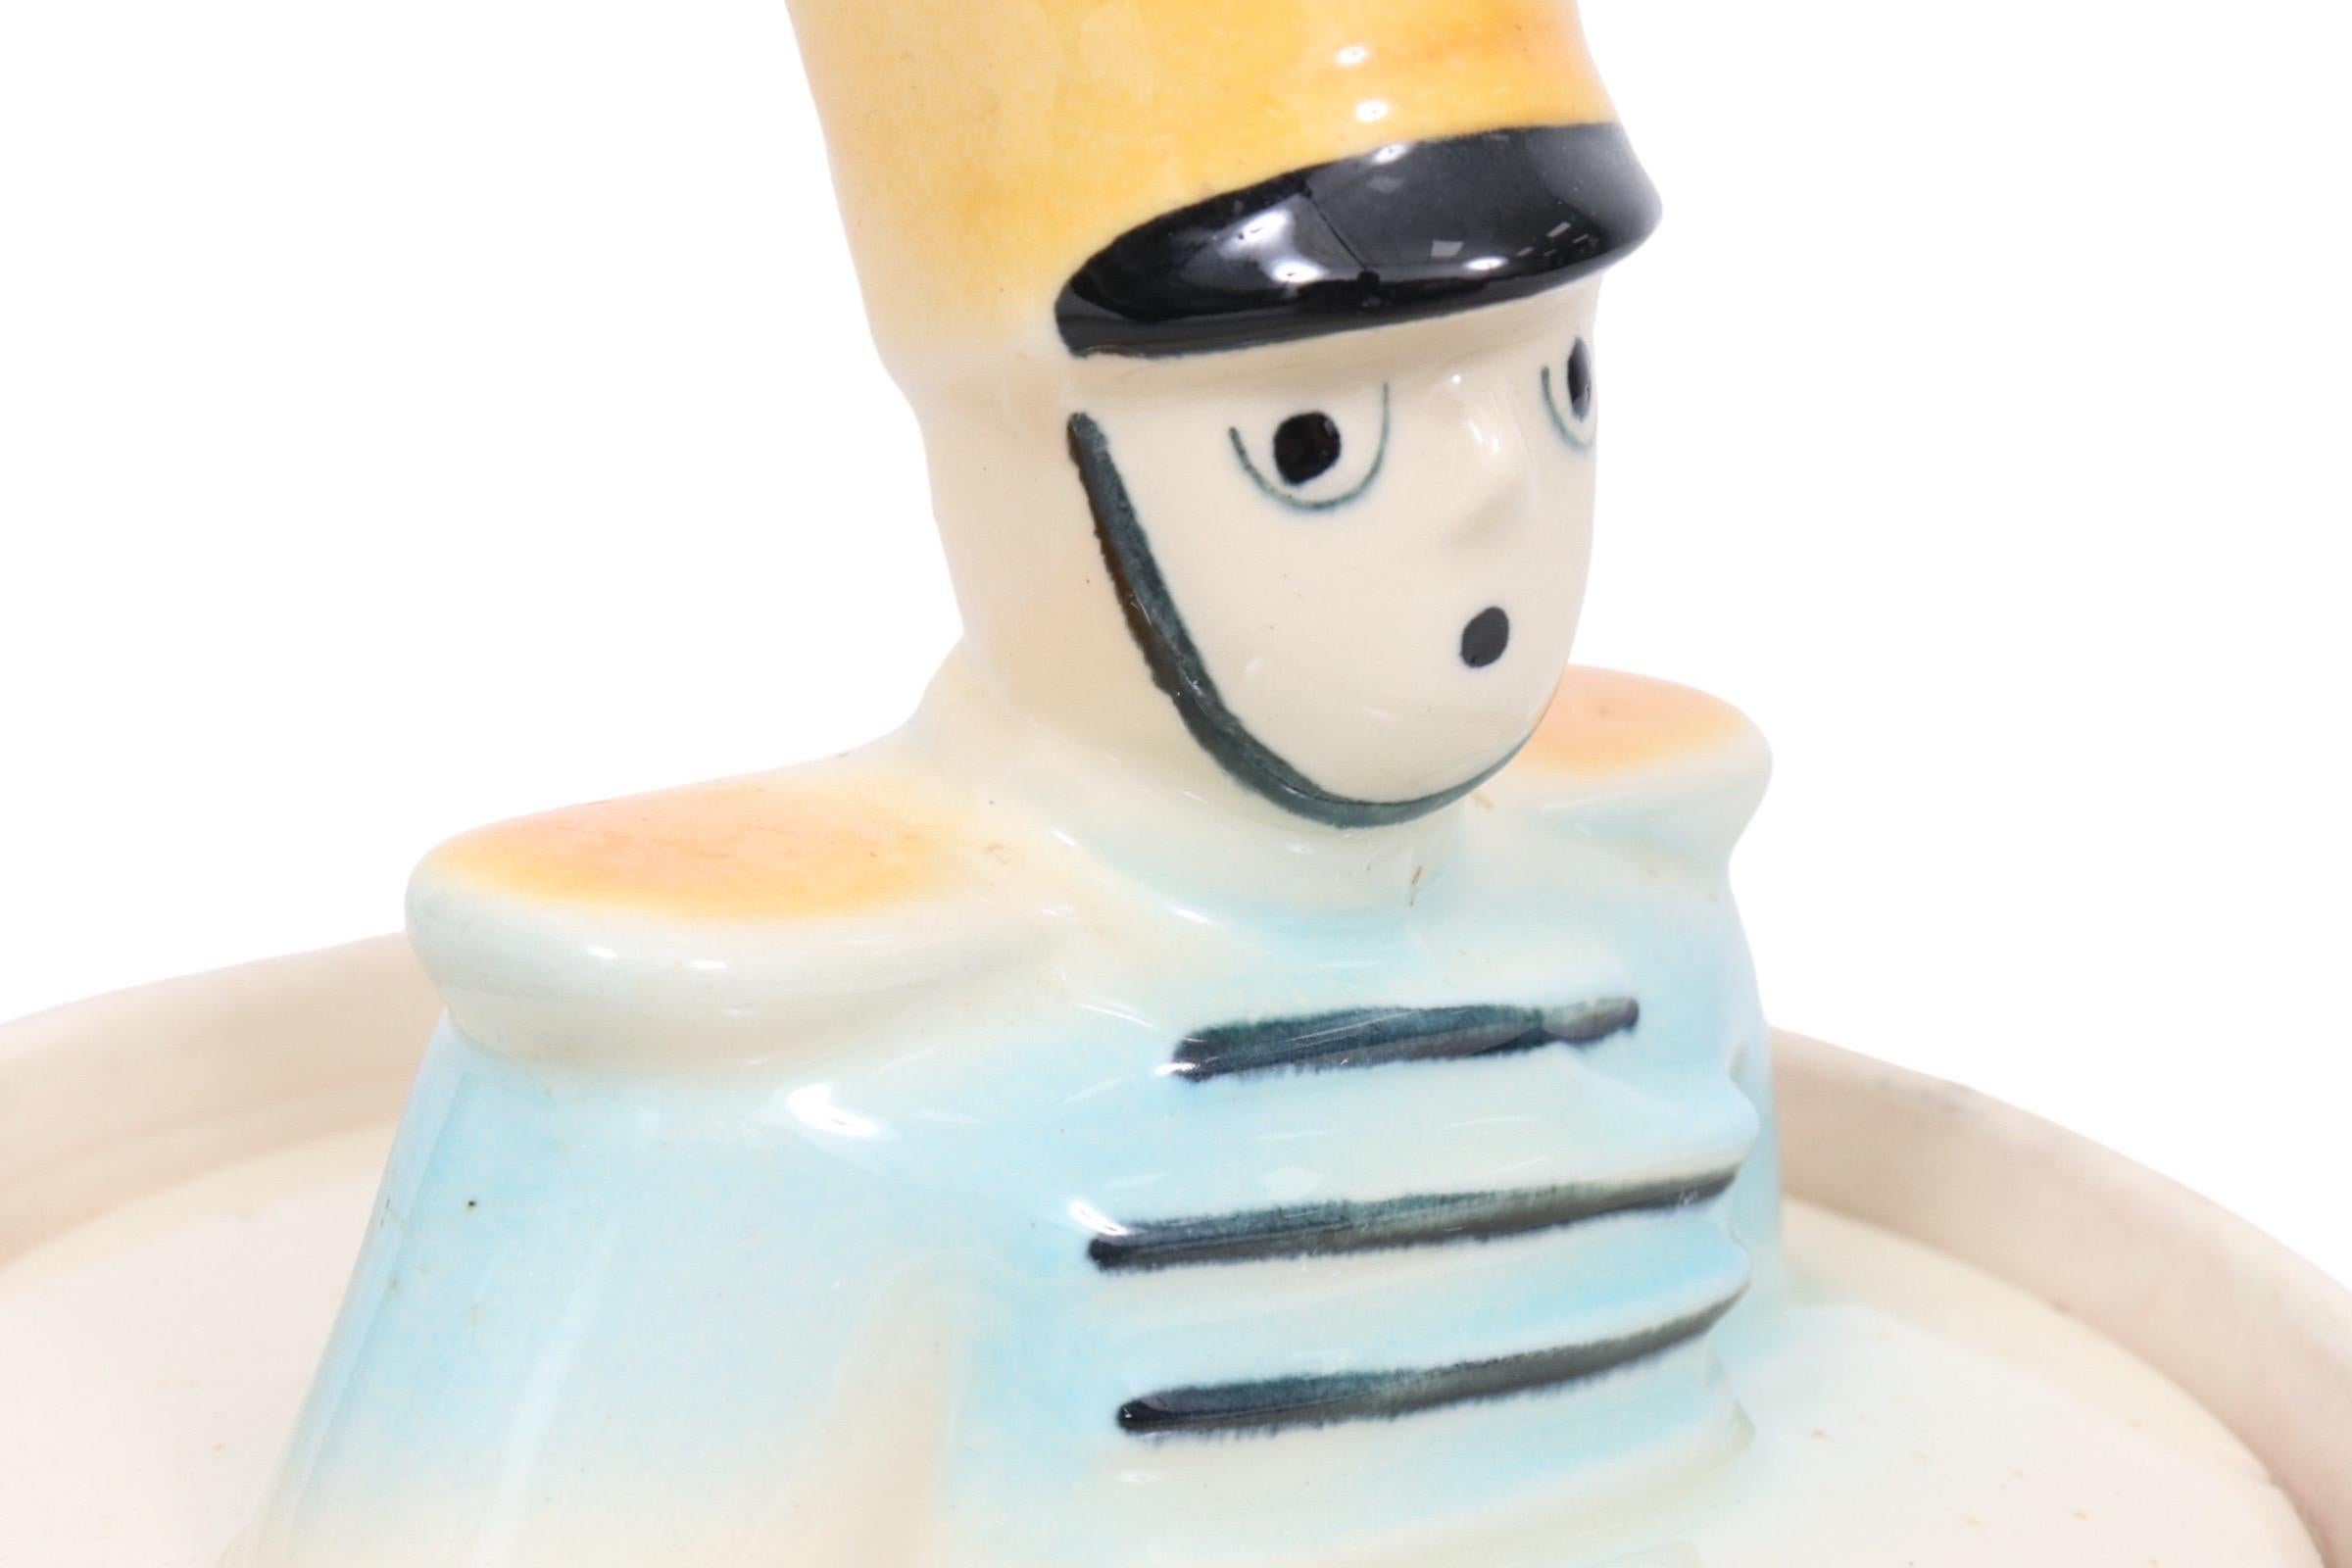 A collectible ceramic cookie jar shaped like a drum, trimmed in red and decorated with a drummer boy in yellow and blue. The lid lifts off with a matching drummer bust. Designed by Robert Heckman for Shawnee Pottery. Marked USA 10 underneath.